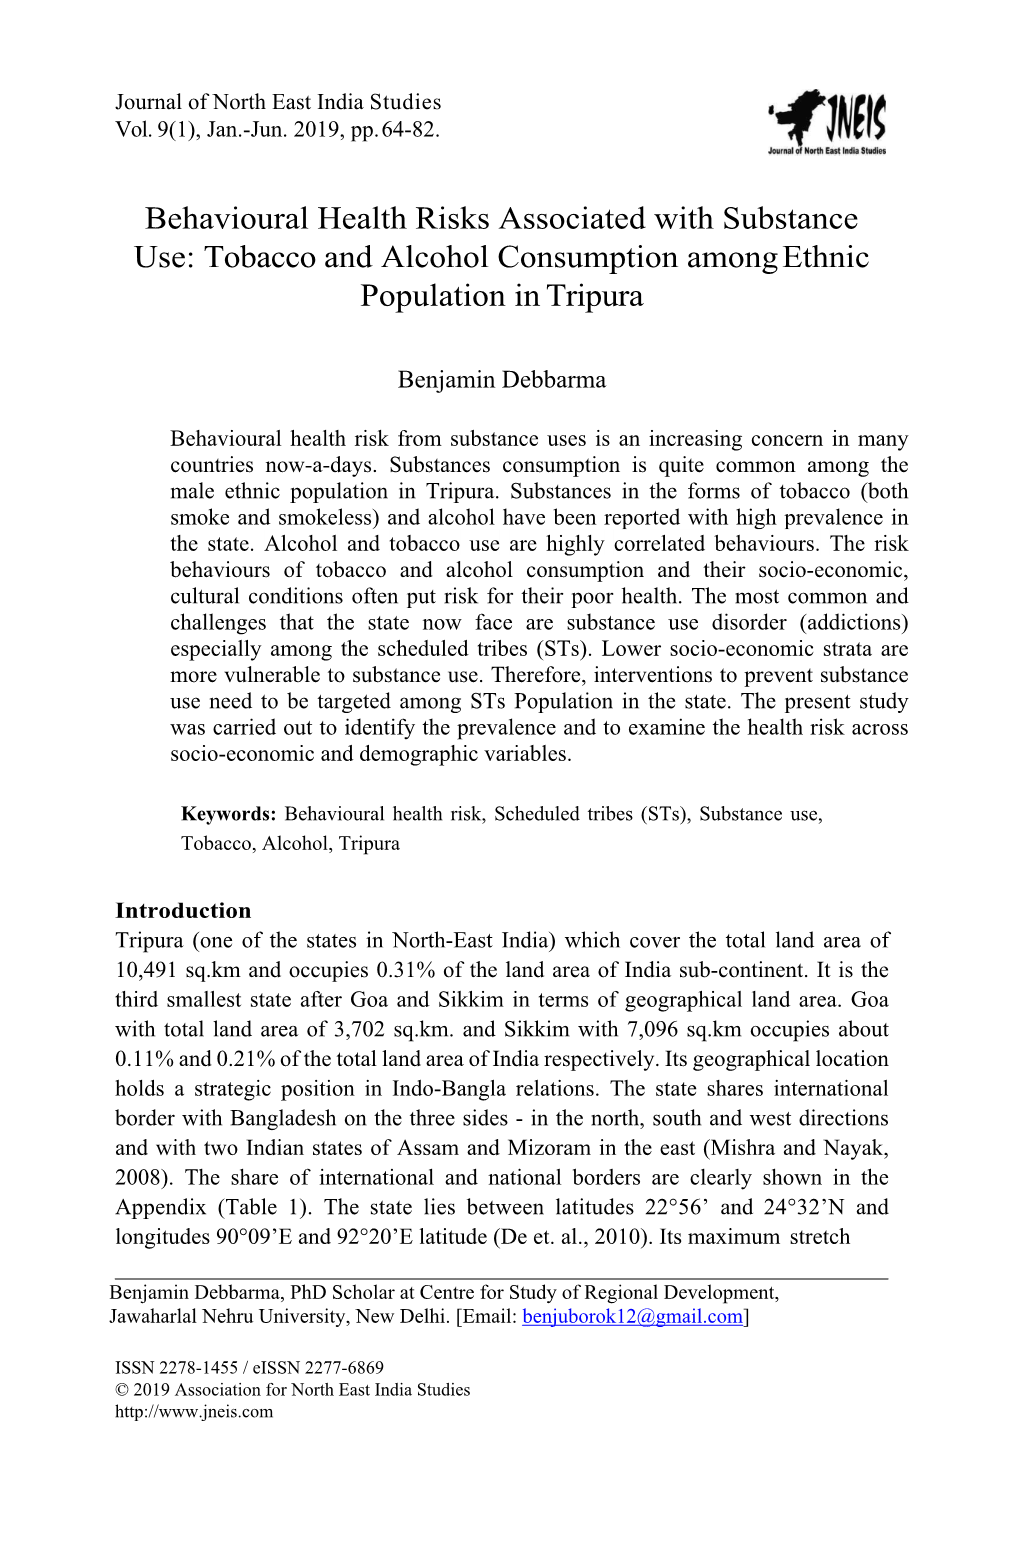 Tobacco and Alcohol Consumption Among Ethnic Population in Tripura